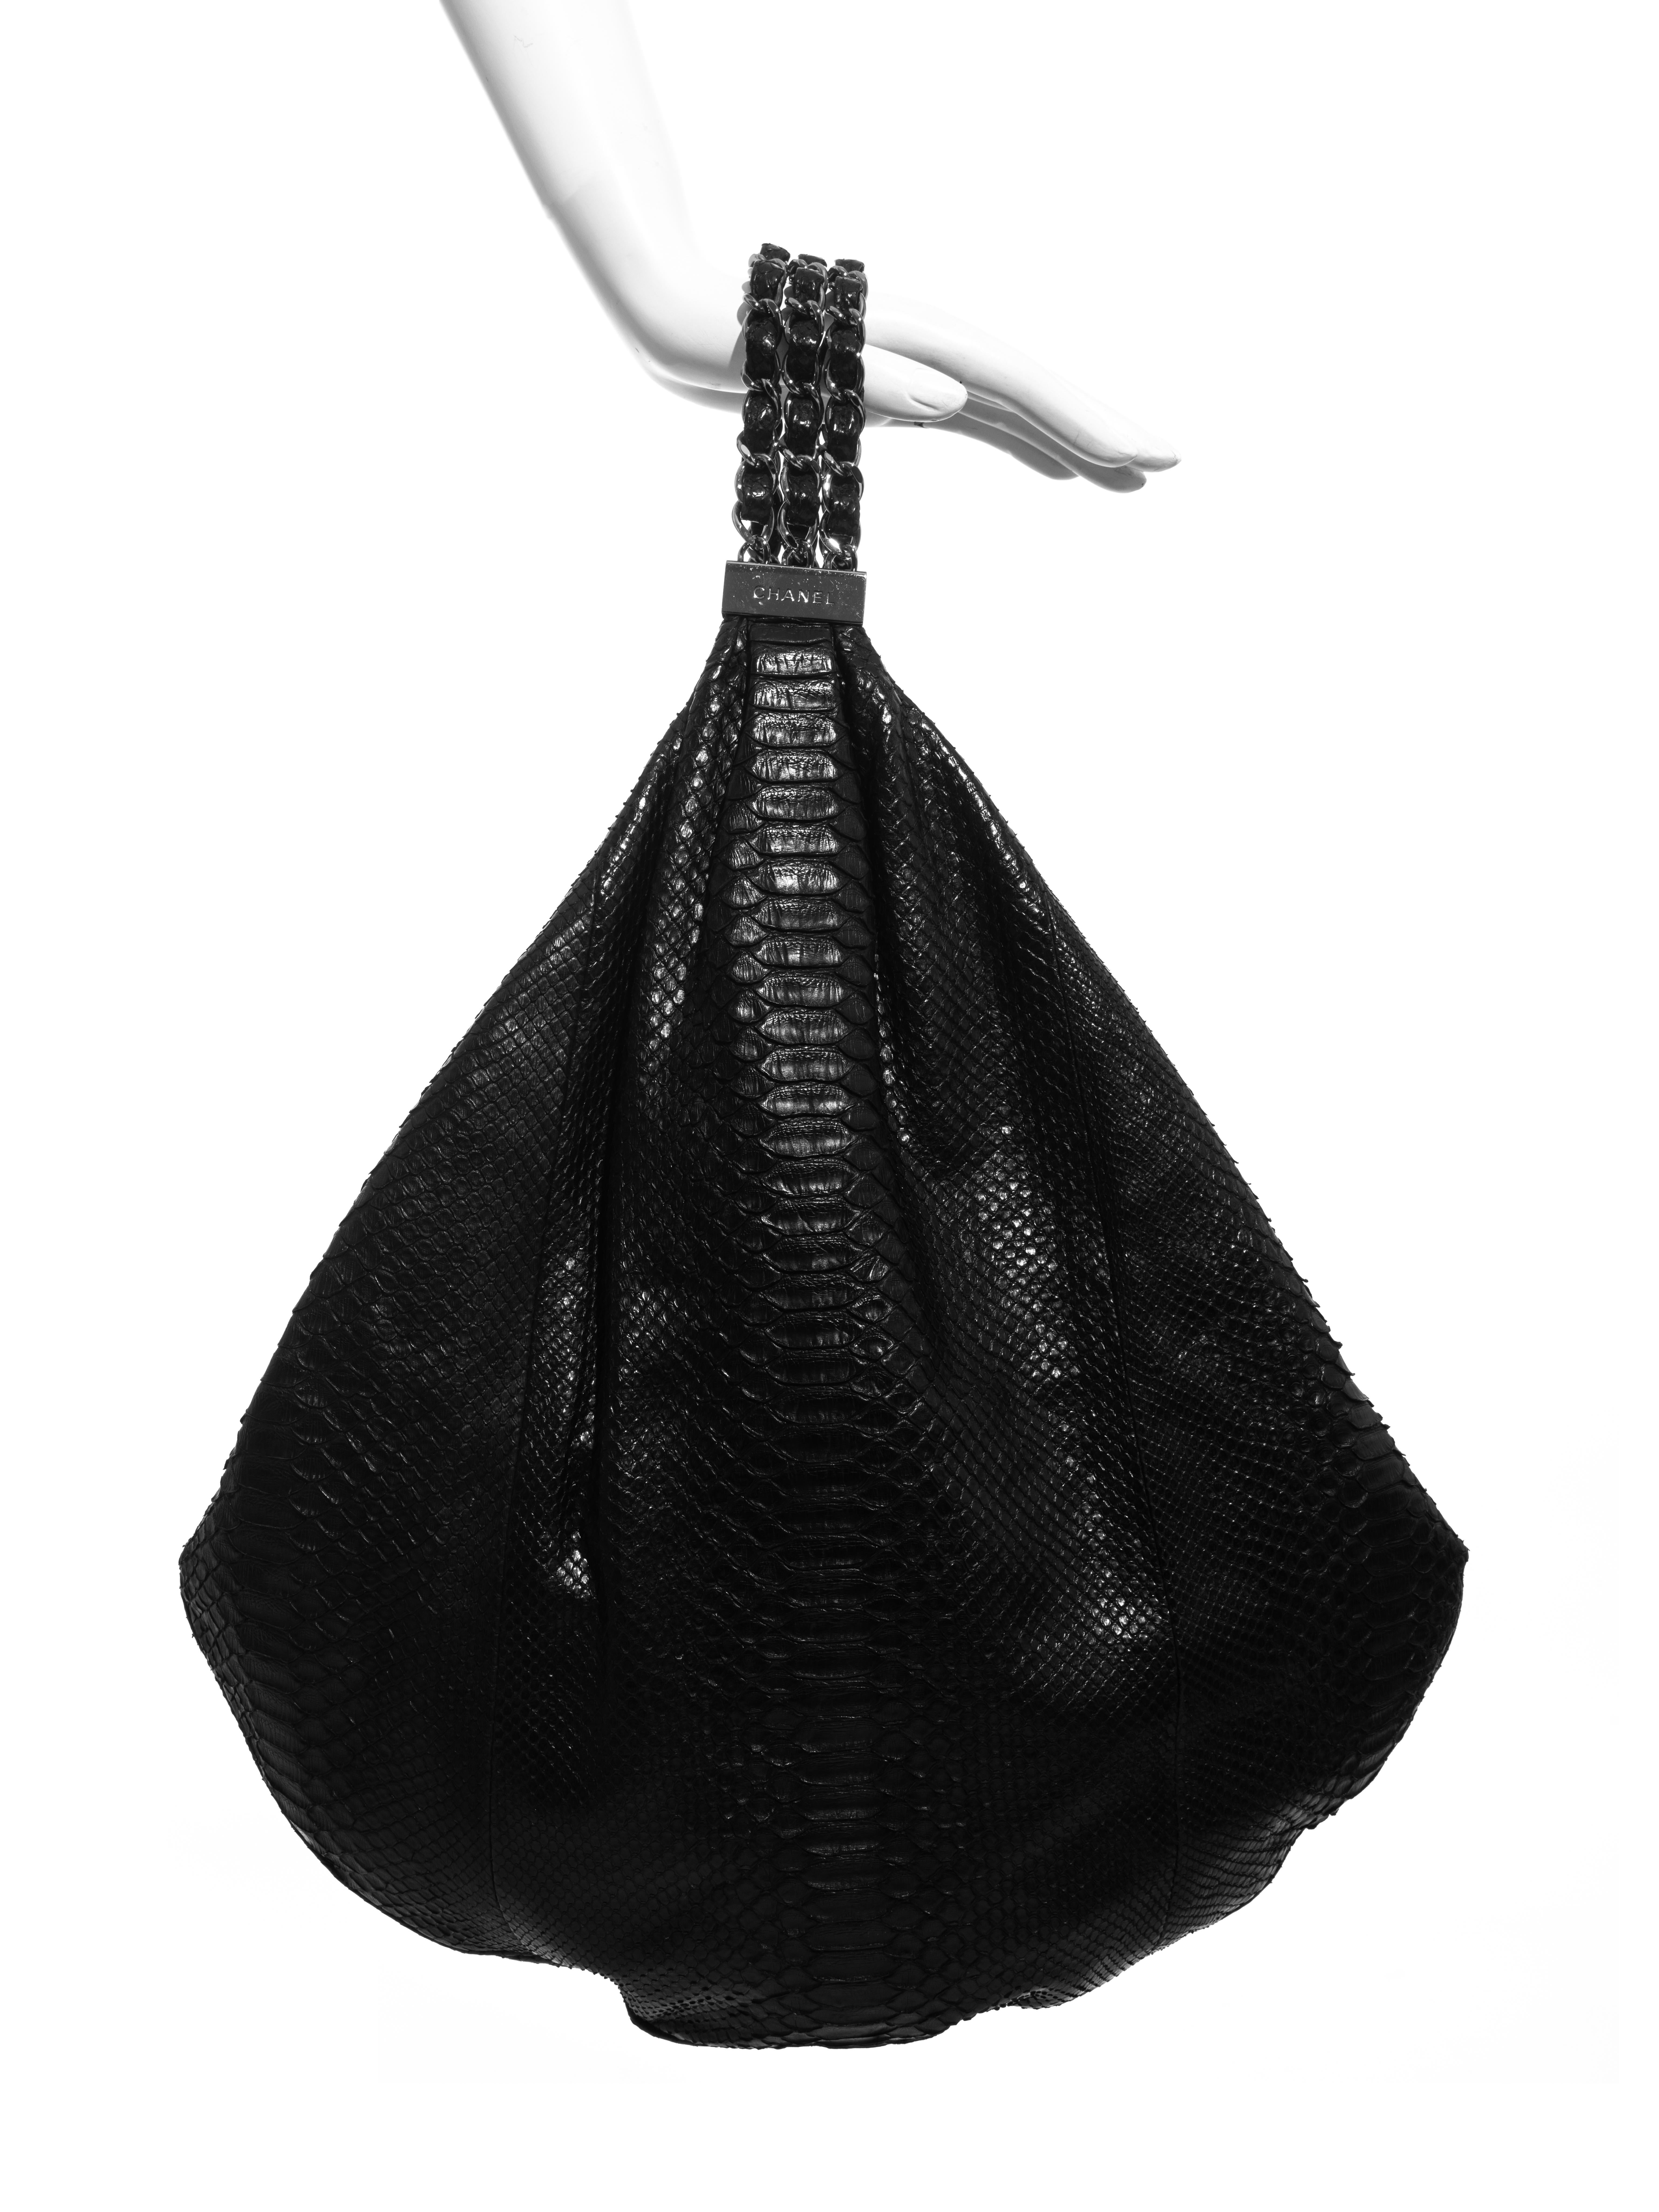 Chanel by Karl Lagerfeld black python hobo bag with three stand chain handle, 'cc' keychain, zip closure and grey satin lining. Sold with original dust bag. 

Spring-Summer 2007